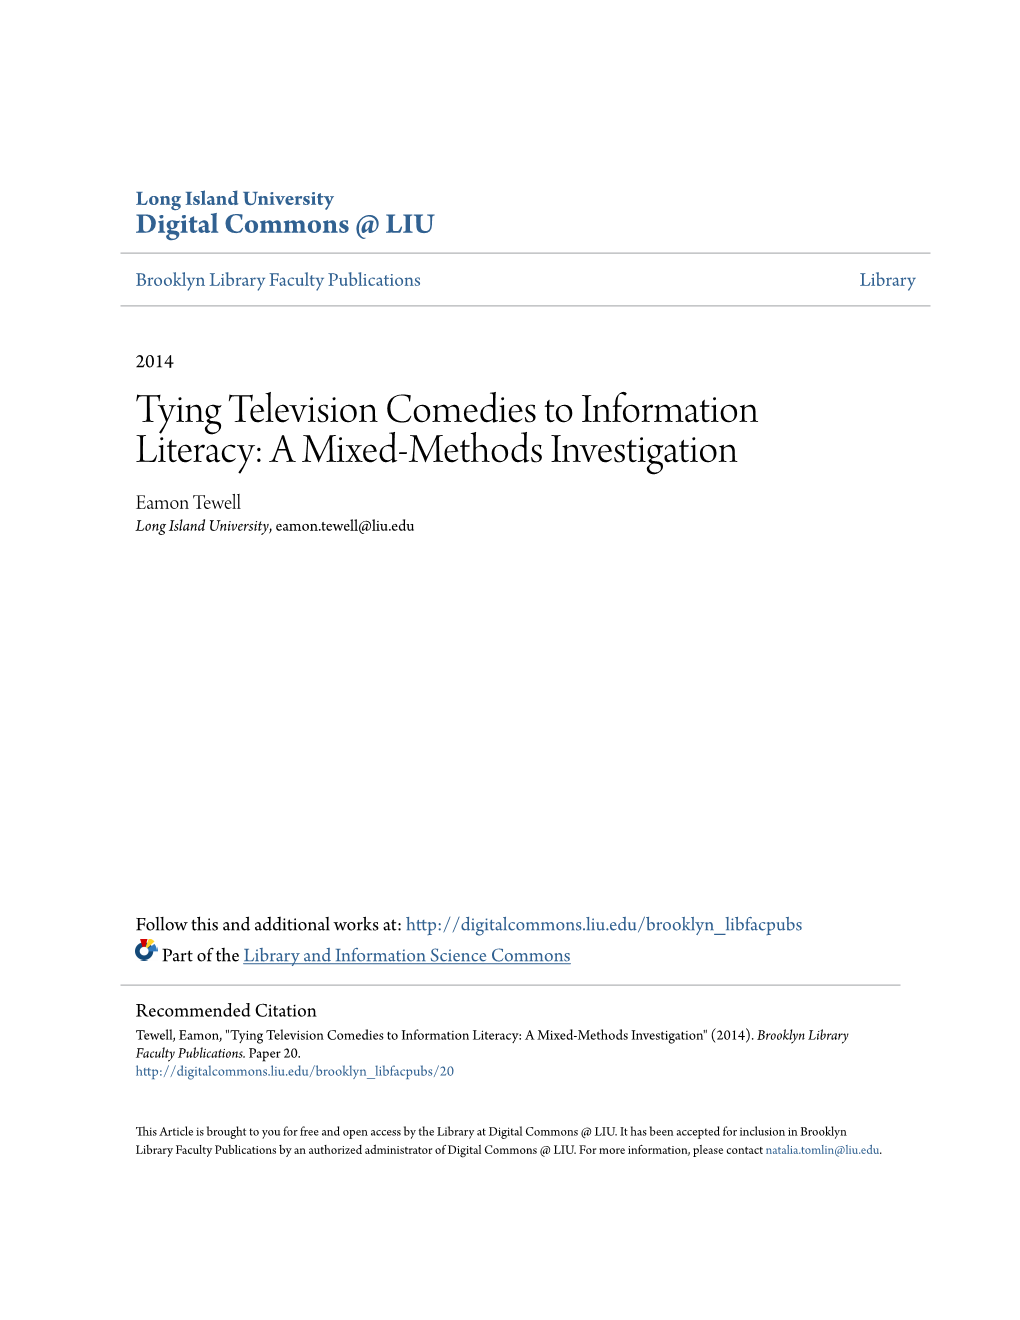 Tying Television Comedies to Information Literacy: a Mixed-Methods Investigation Eamon Tewell Long Island University, Eamon.Tewell@Liu.Edu